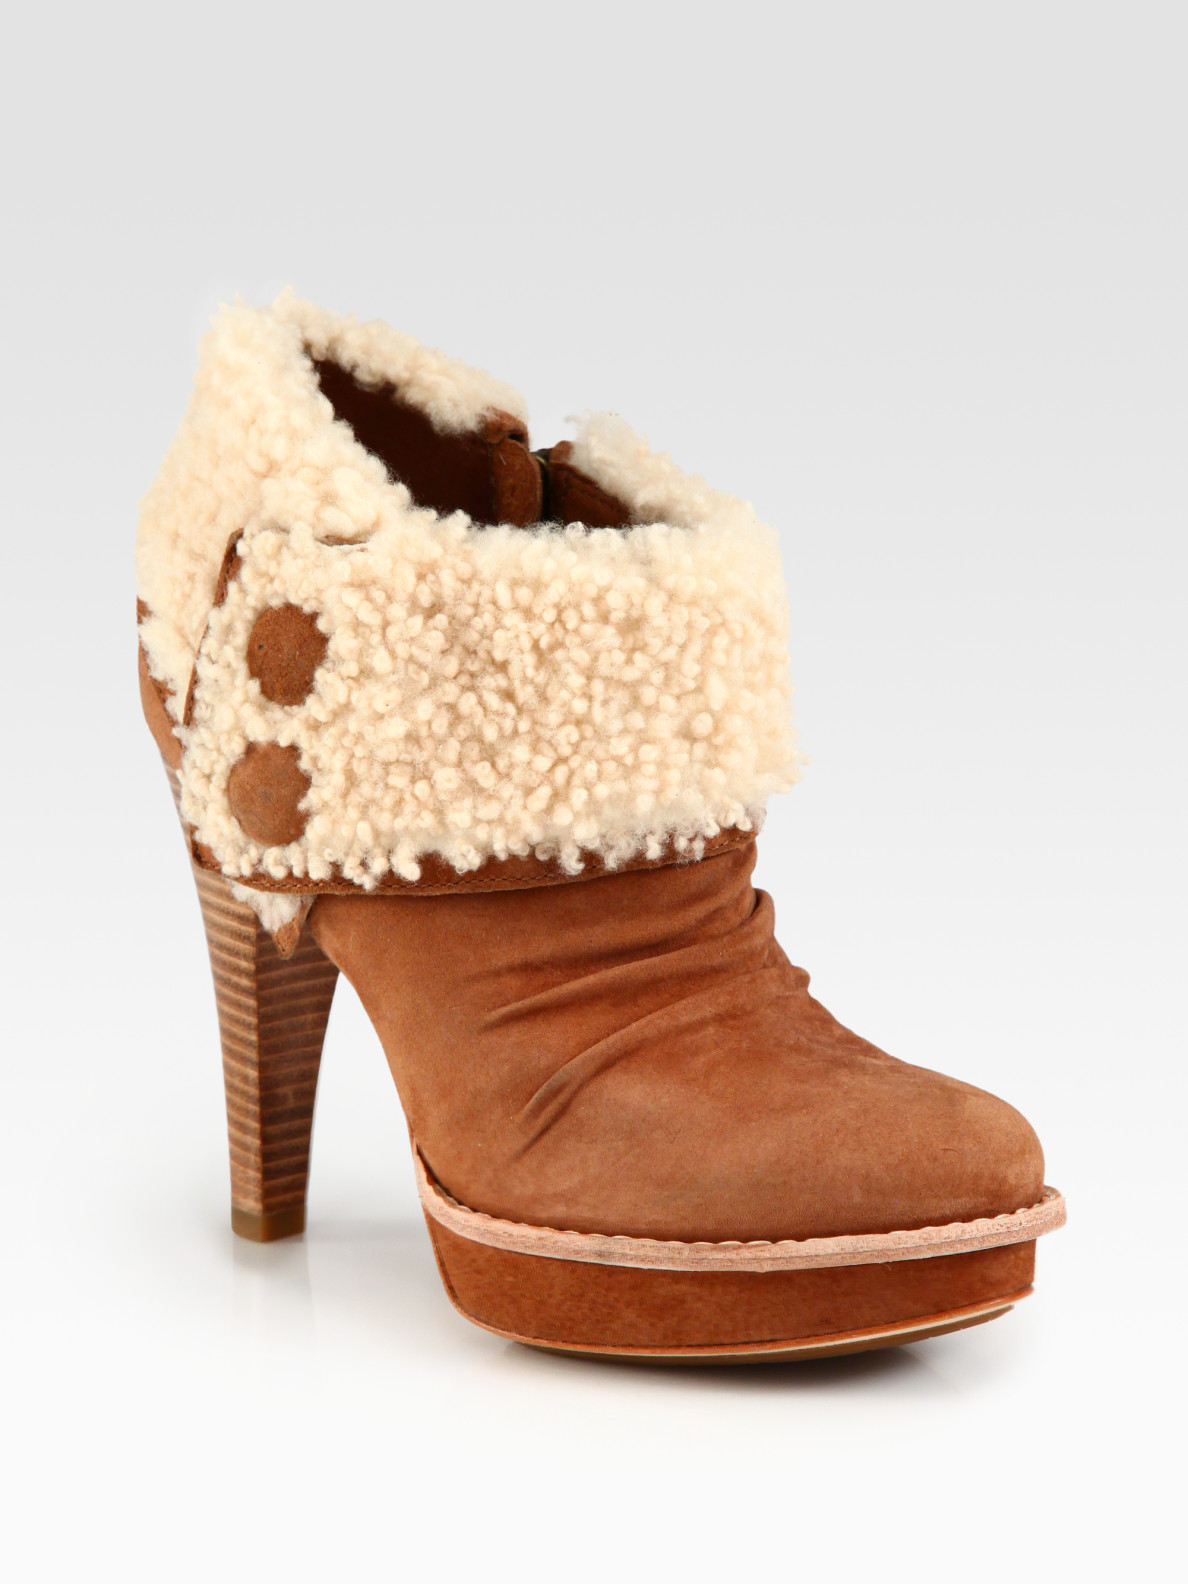 Lyst - Ugg Suede and Shearling Platform Ankle Boots in Brown